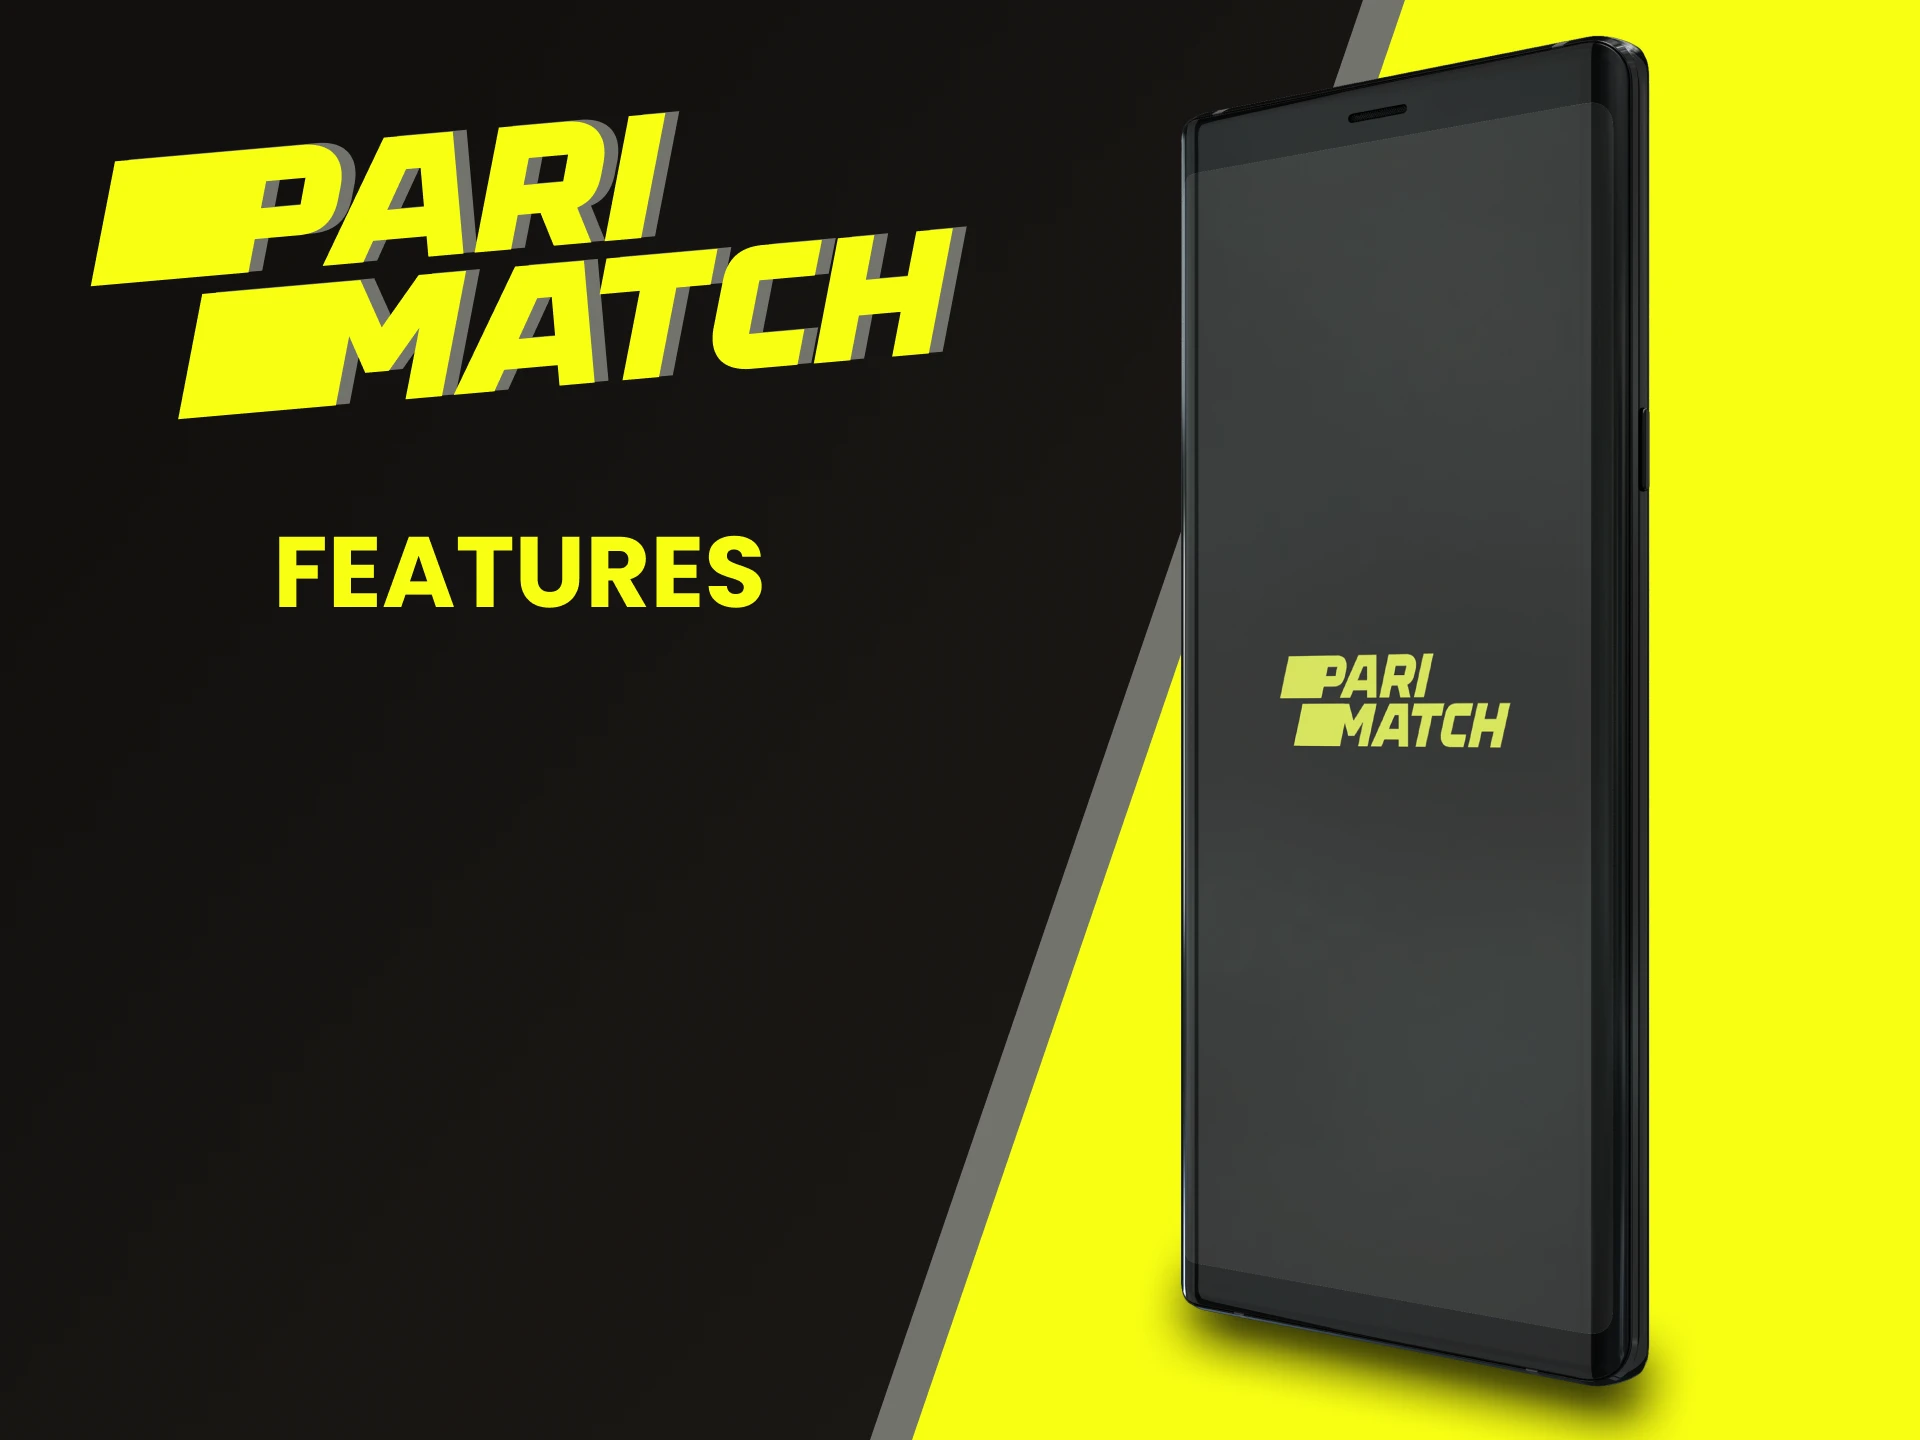 We will tell you about the capabilities of the Parimatch application.